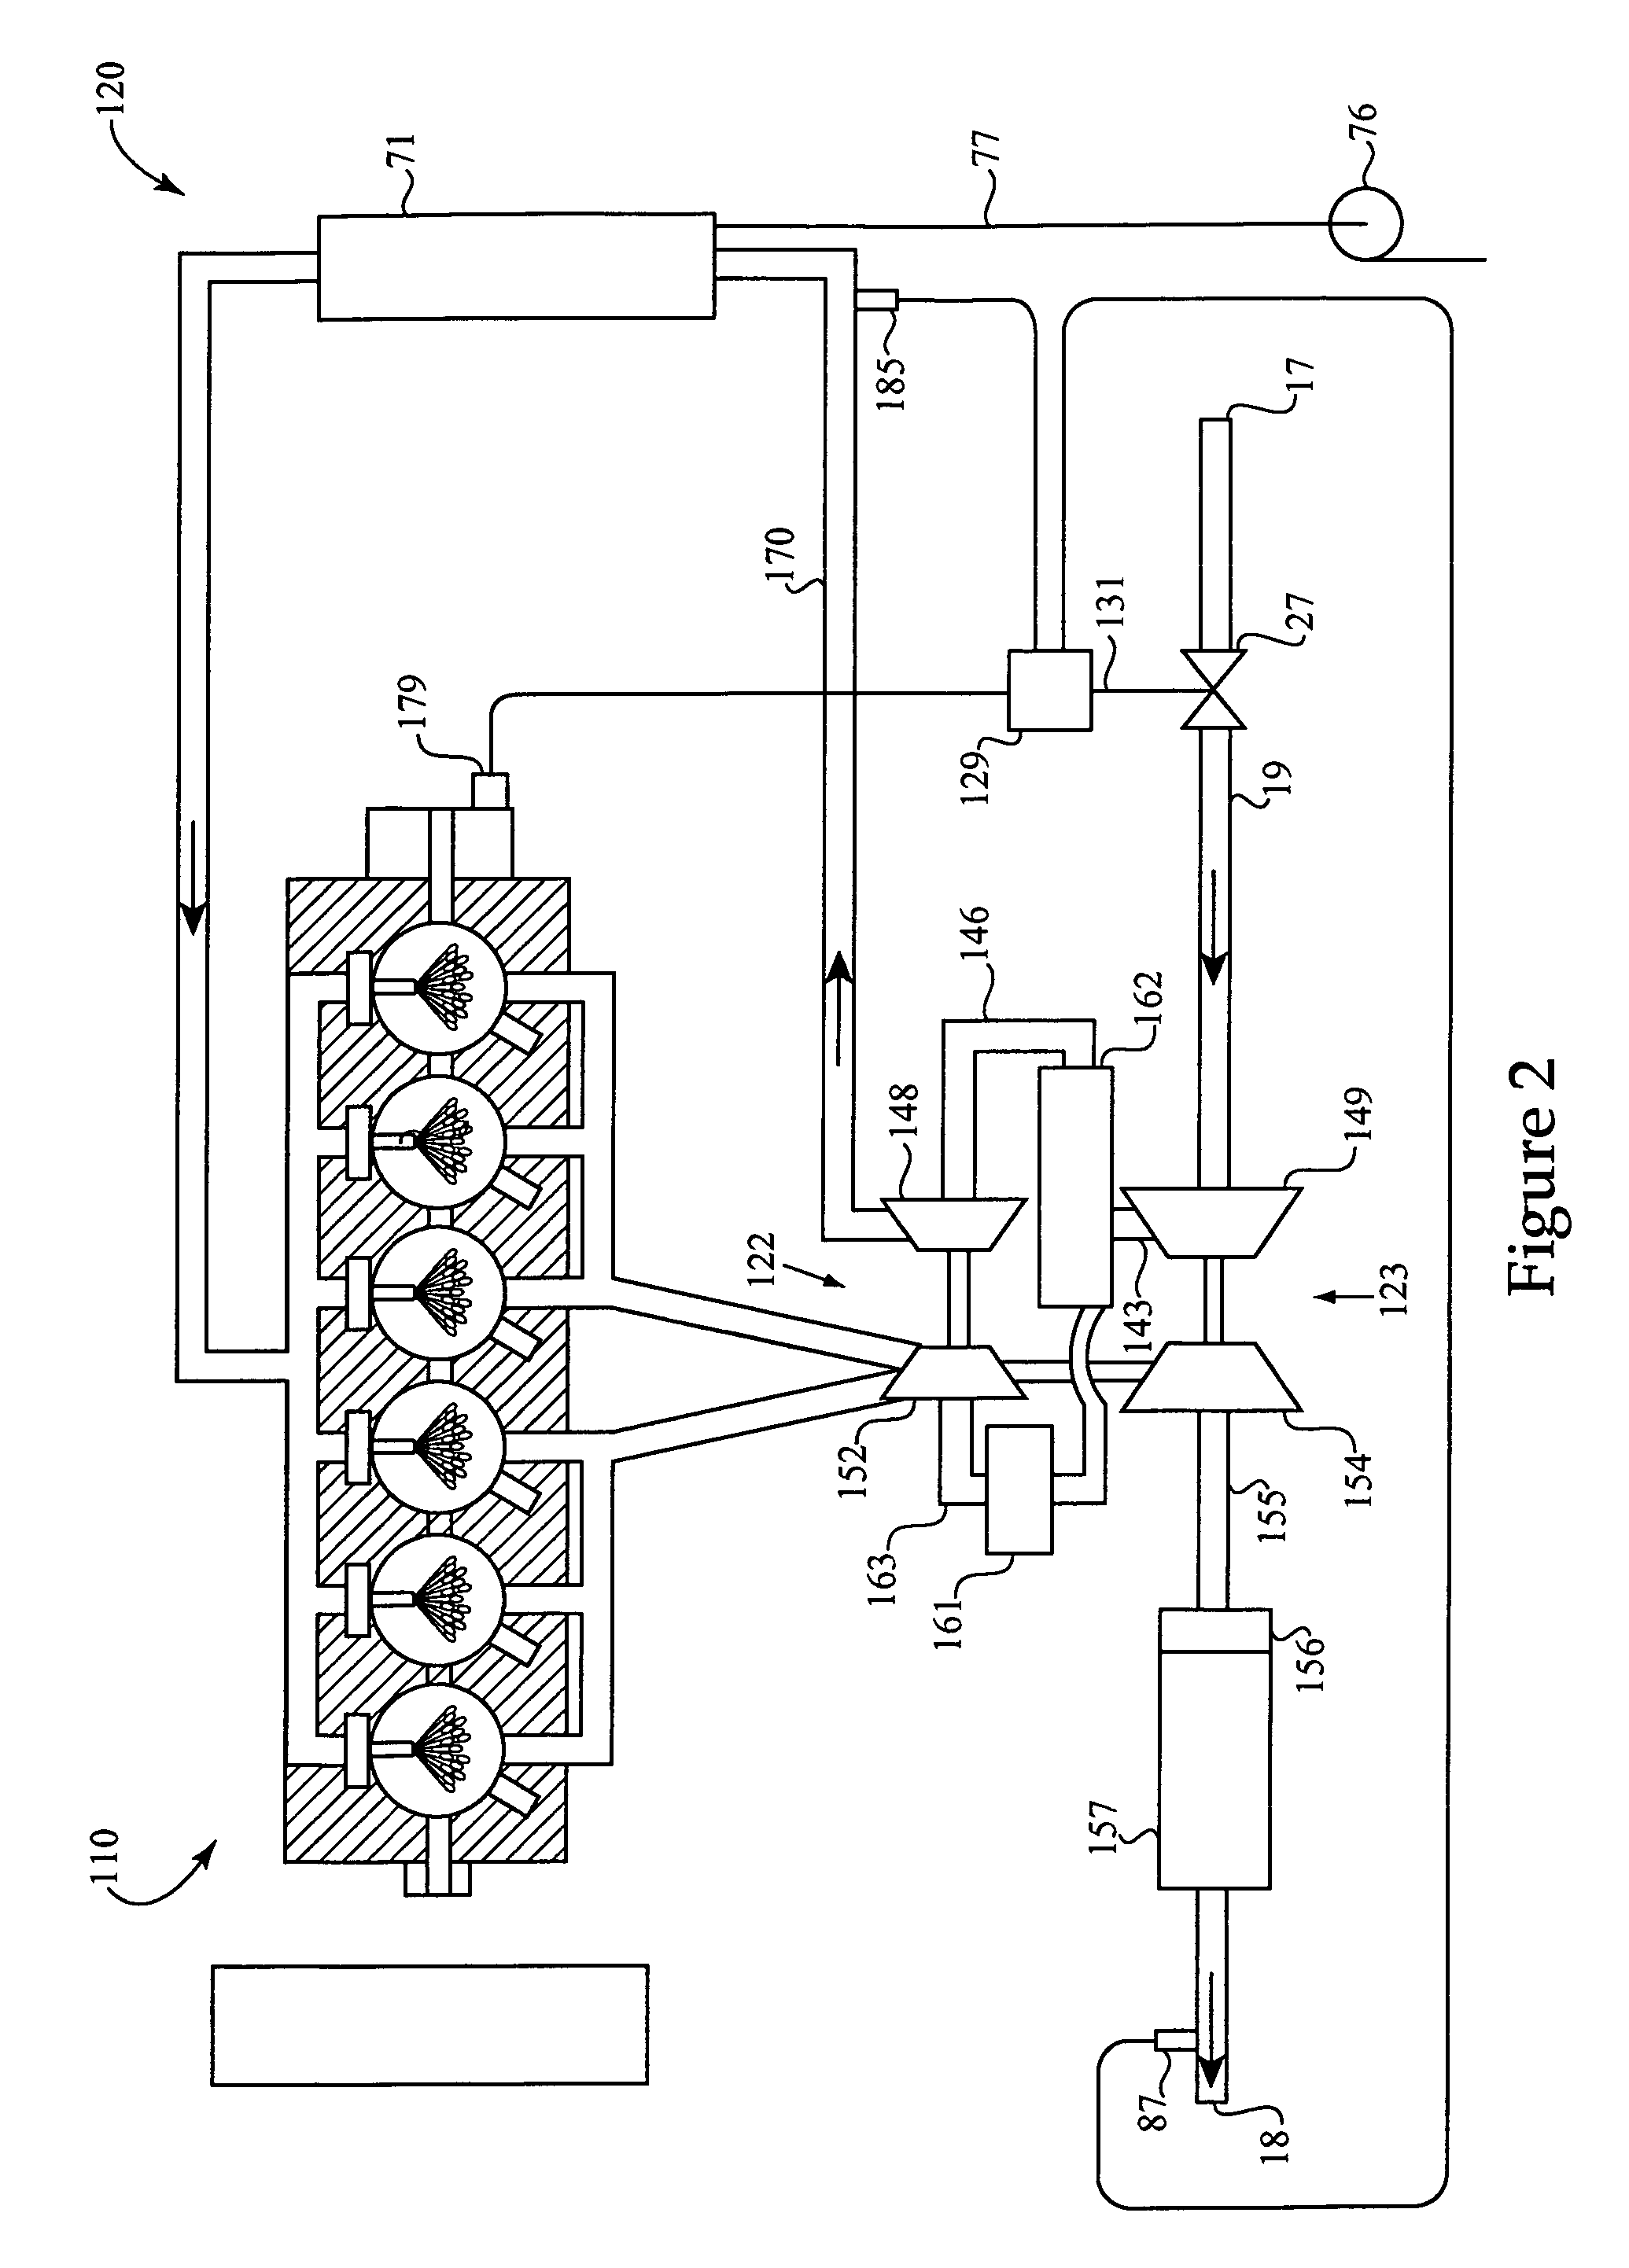 High load operation in a homogeneous charge compression ignition engine